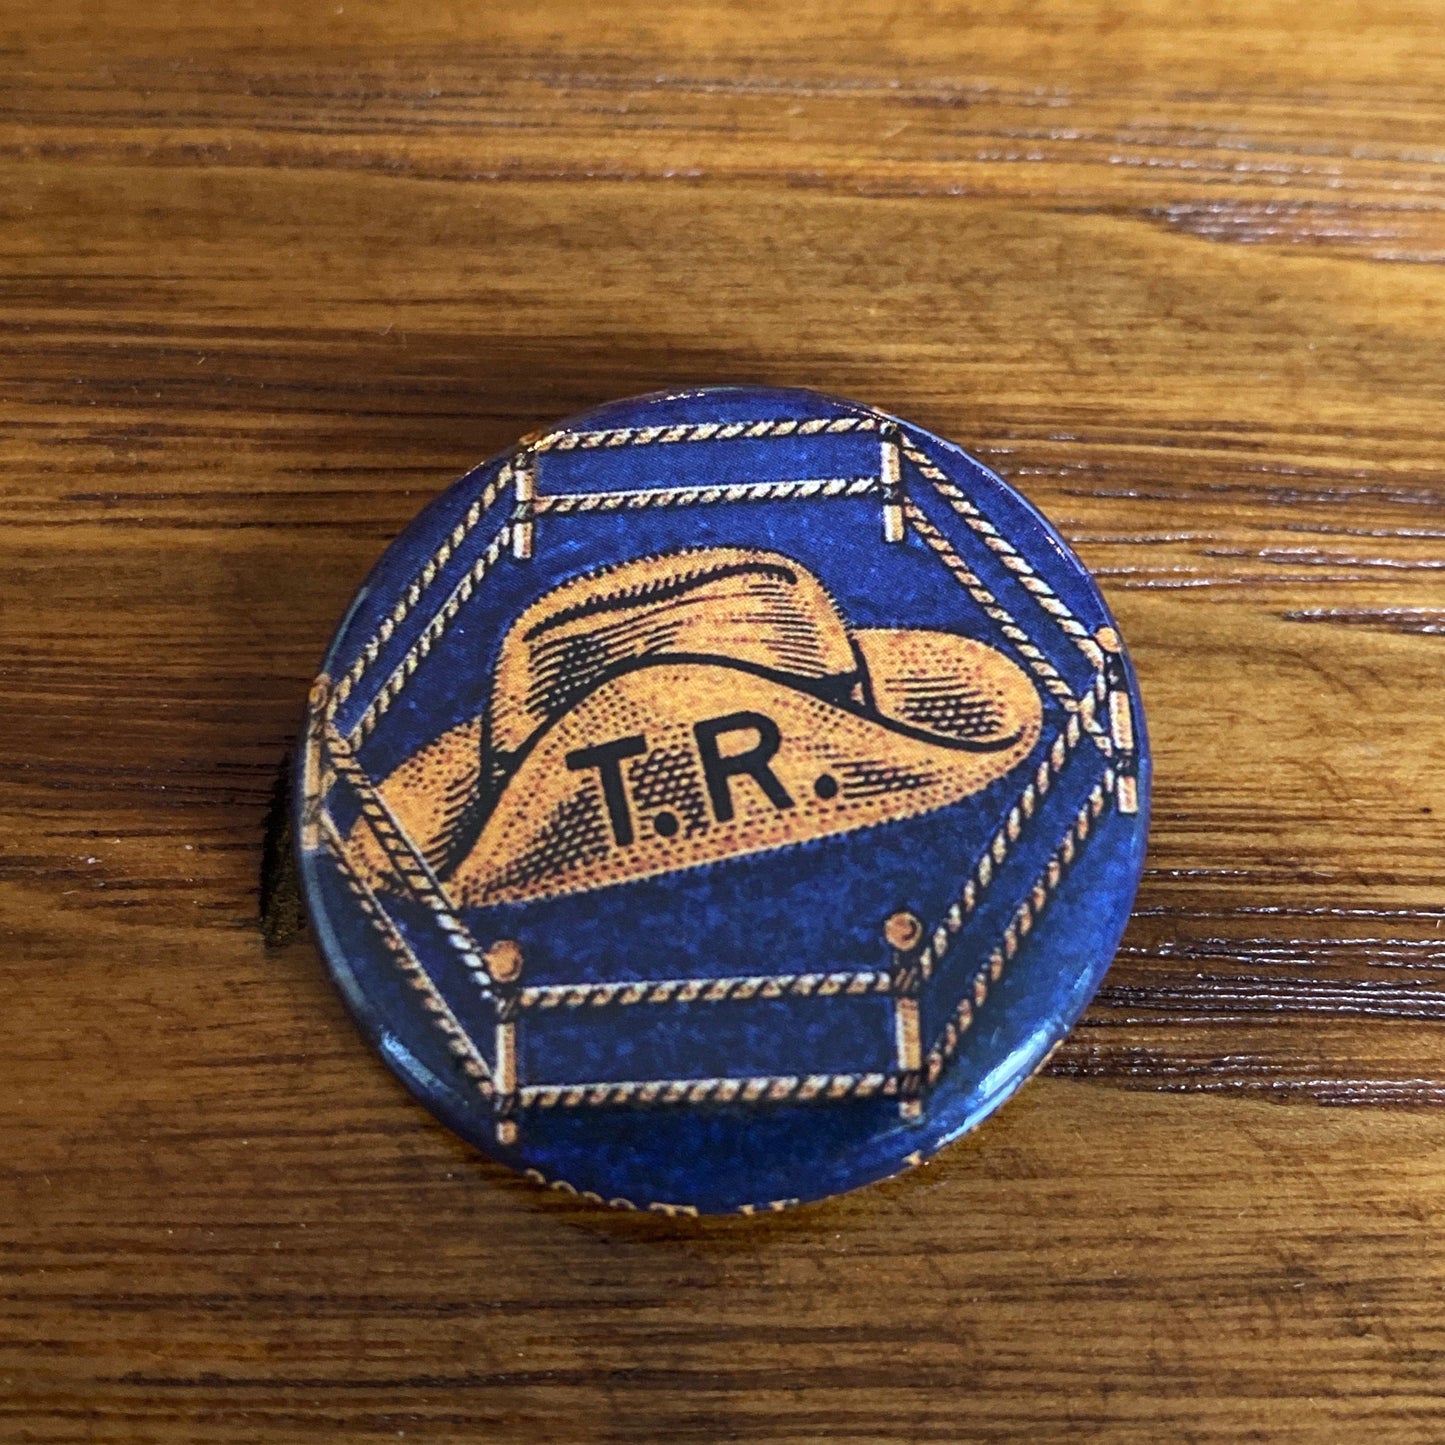 Teddy Roosevelt “Hat in the ring” presidential campaign button